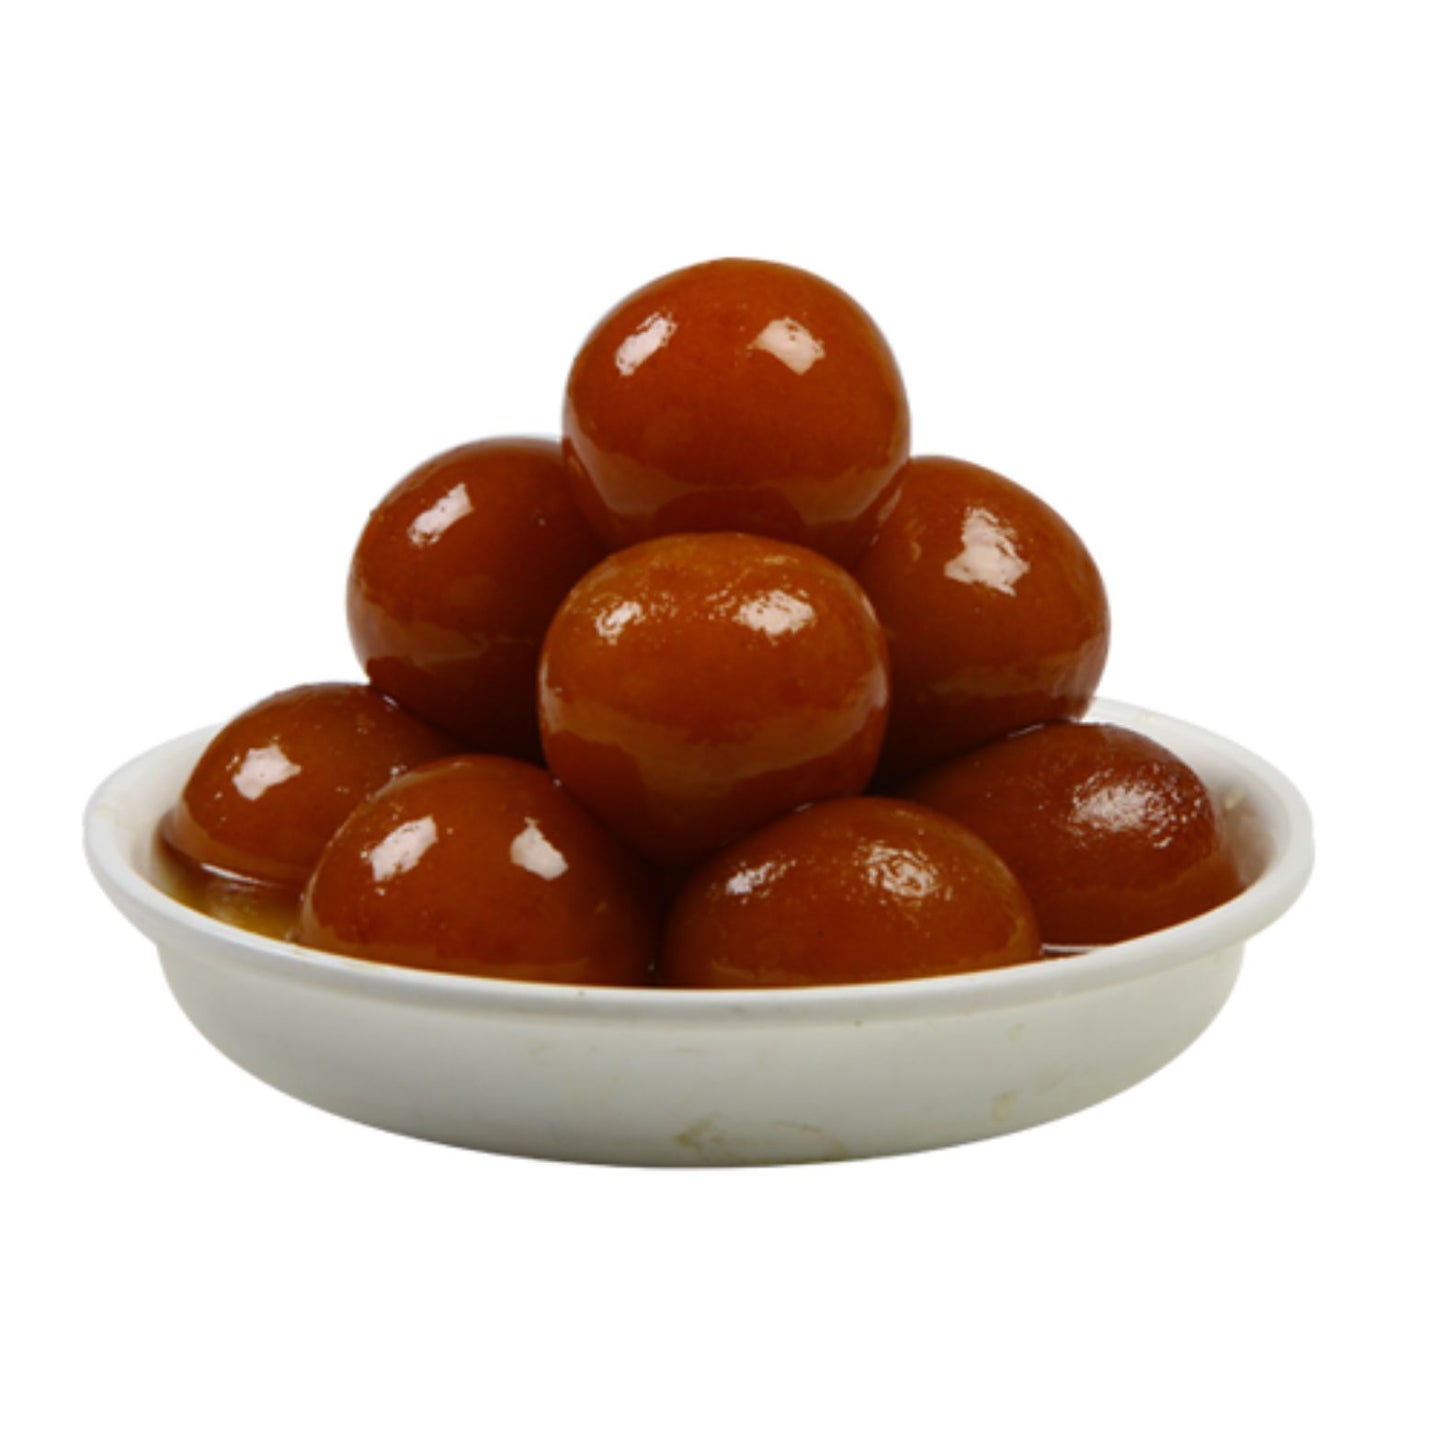 3.7 Kg Jumbo Gulab Jamun Can - Pack of 4 Cans